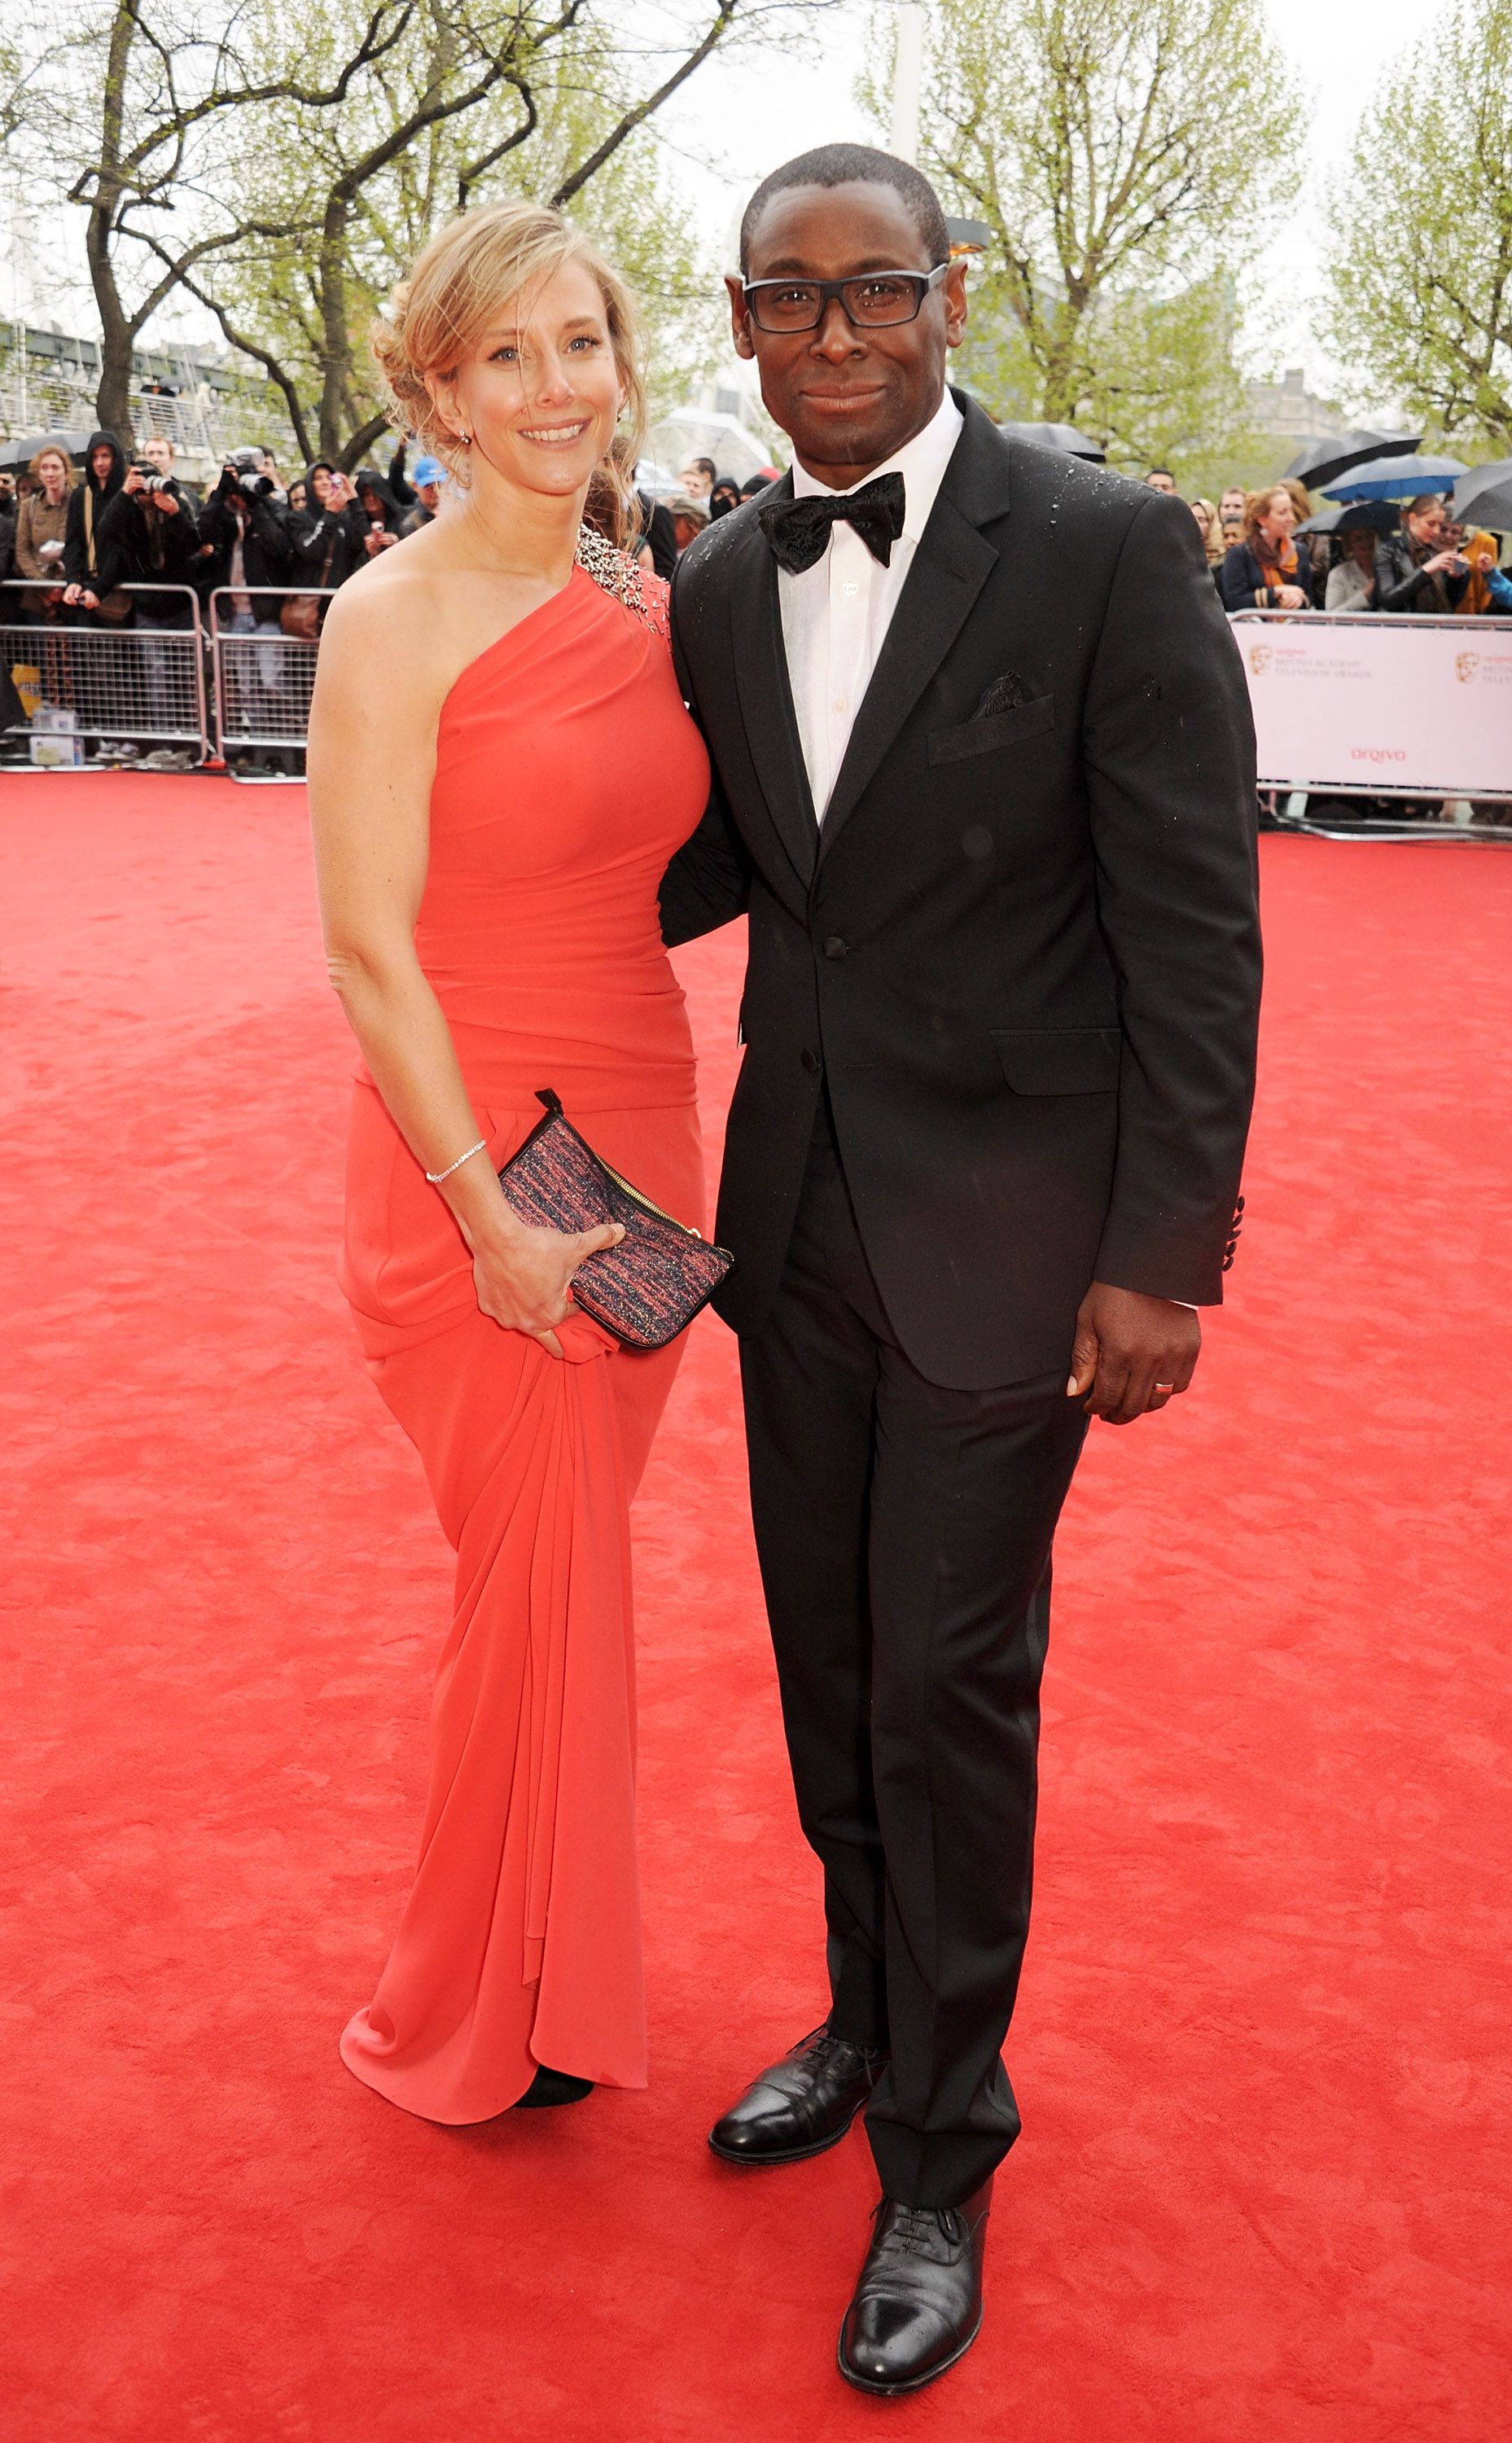 David Harewood and wife Kirsty Hands at the Arqiva British Academy Television Awards 2013 at the Royal Festival Hall on May 12, 2013 | Photo: Getty Images